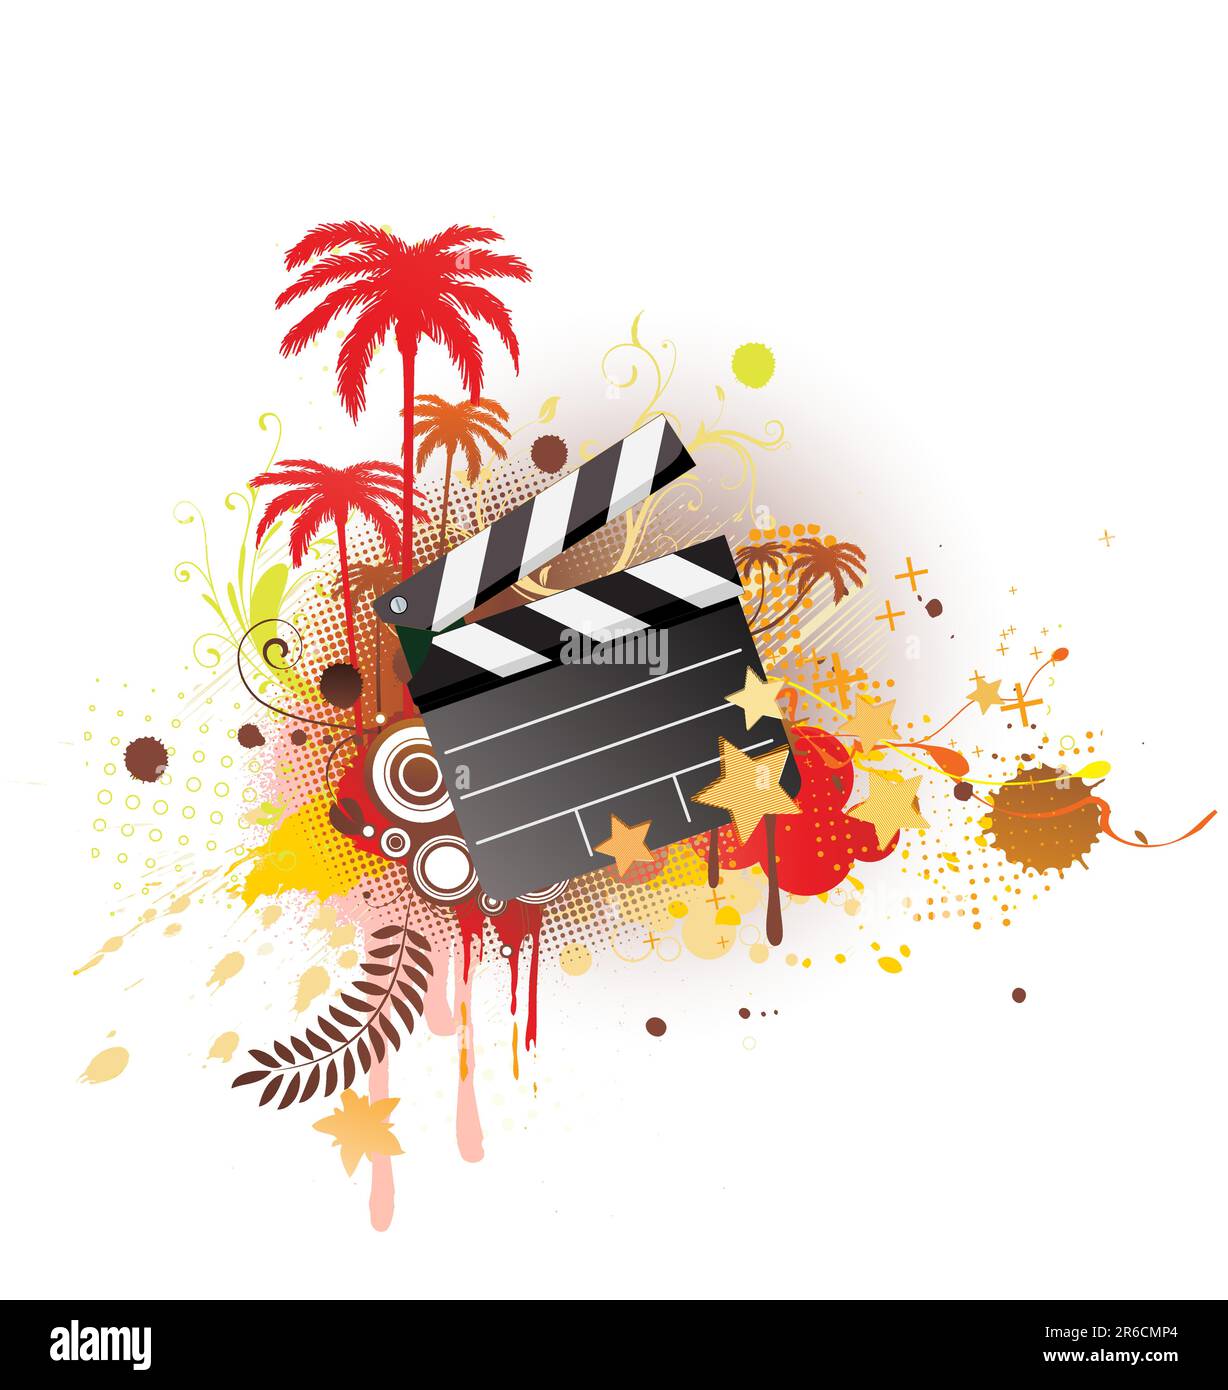 A vector illustration of decorative background with palm trees, grunge circles and movie clapper board Stock Vector